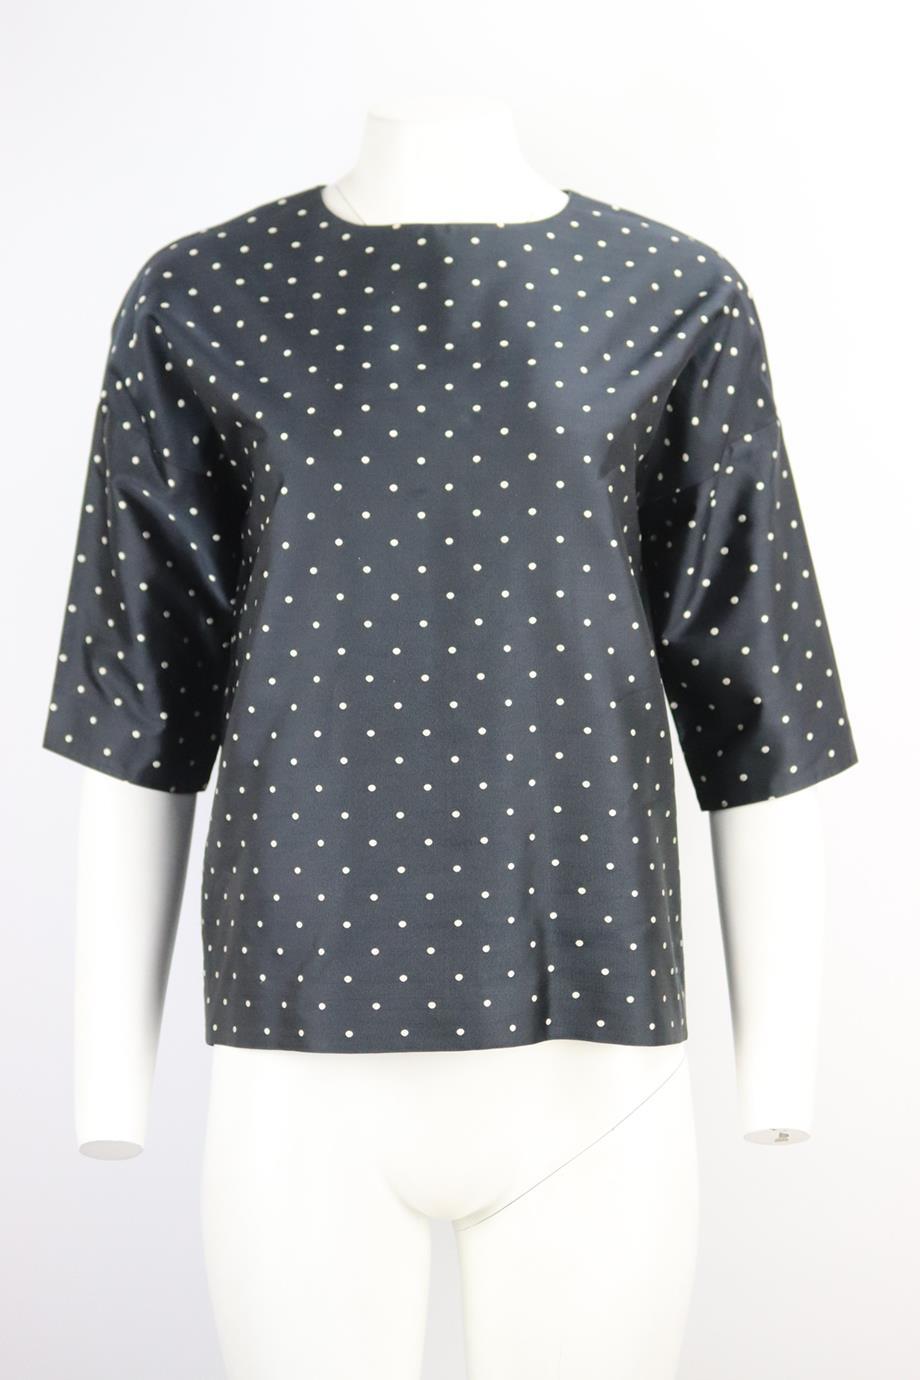 Christian Dior polka dot silk twill top. Black. Sleeveless, crewneck. Button fastening at back. 100% Silk; lining: 100% silk. Size: FR 36 (UK 8, US 4, IT 40). Bust: 43 in. Waist: 42 in. Hips: 38.5 in. Length: 24 in.Very good condition - Few light